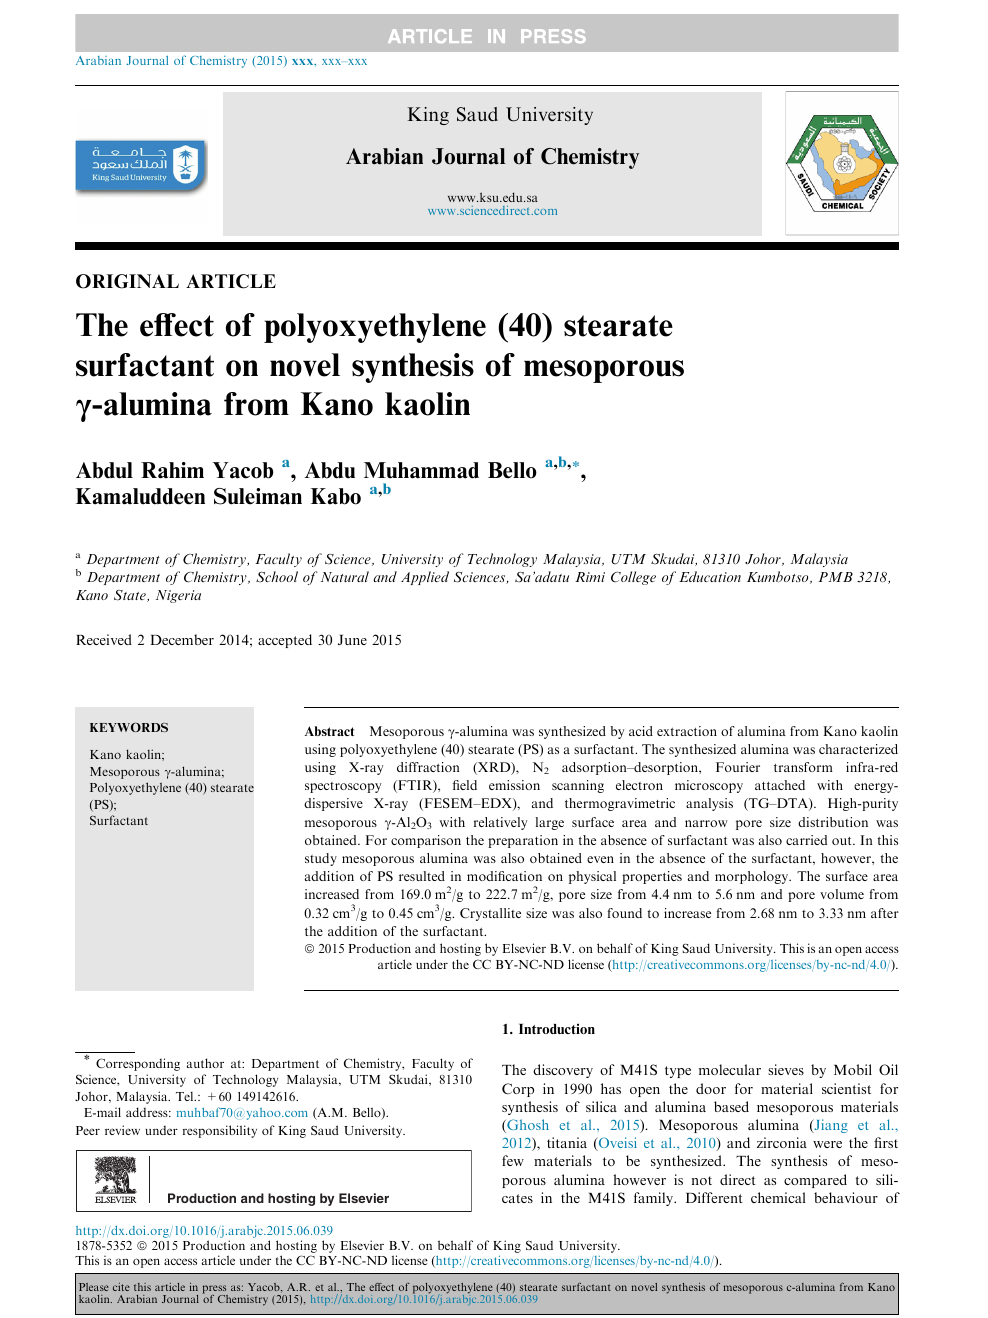 The effect of polyoxyethylene (40) stearate surfactant on novel synthesis  of mesoporous γ-alumina from Kano kaolin – topic of research paper in  Chemical sciences. Download scholarly article PDF and read for free